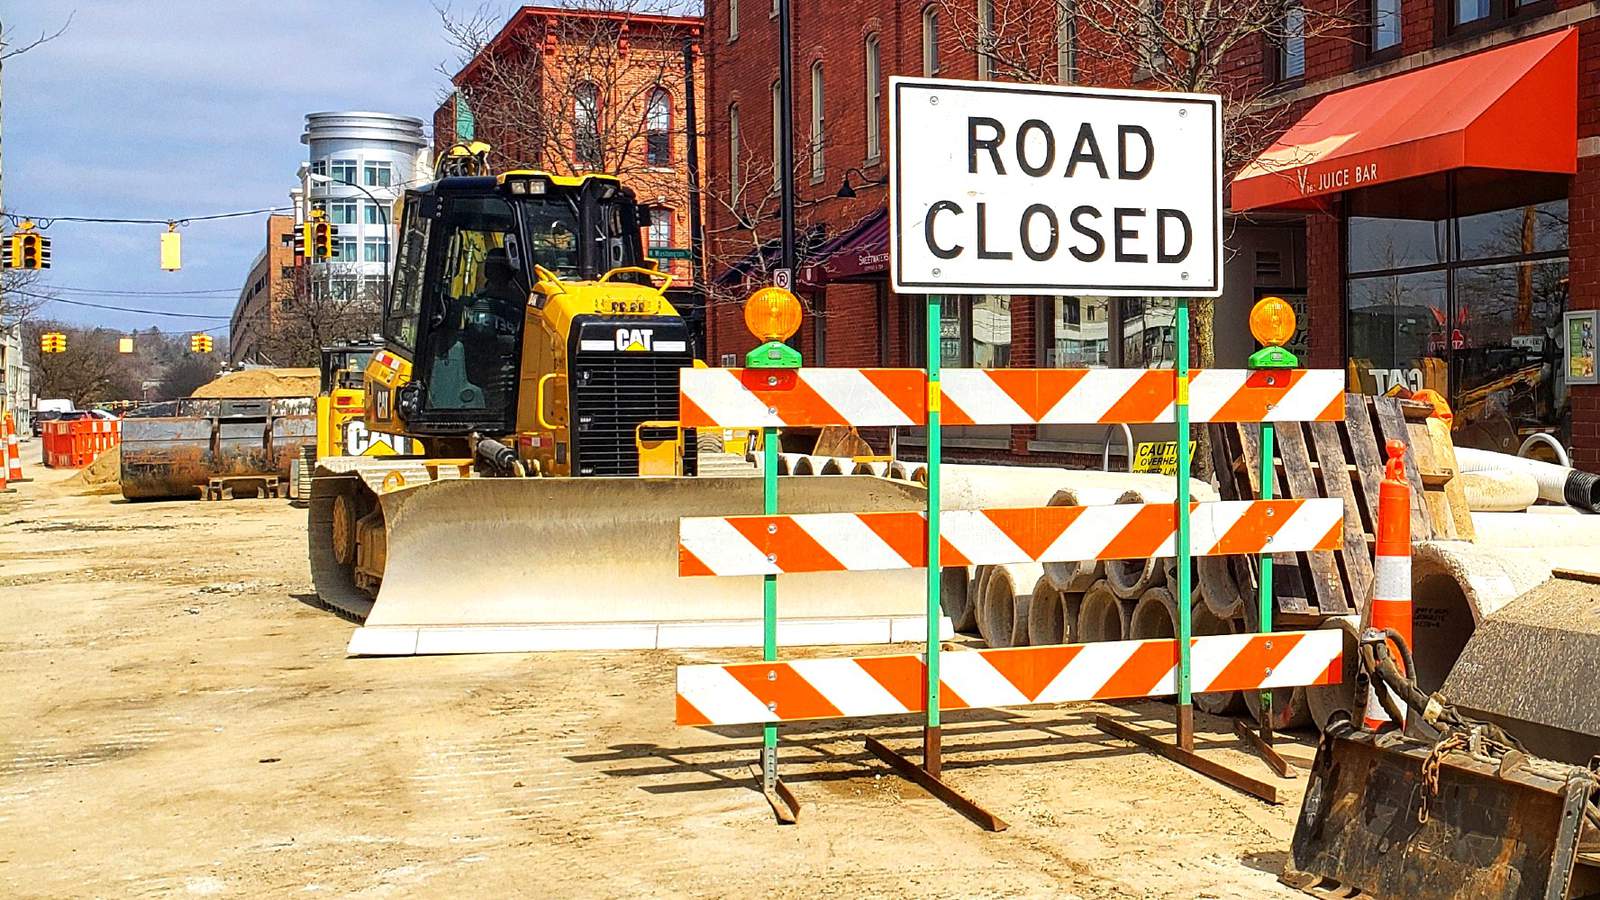 Construction, maintenance to close several roads in Ann Arbor